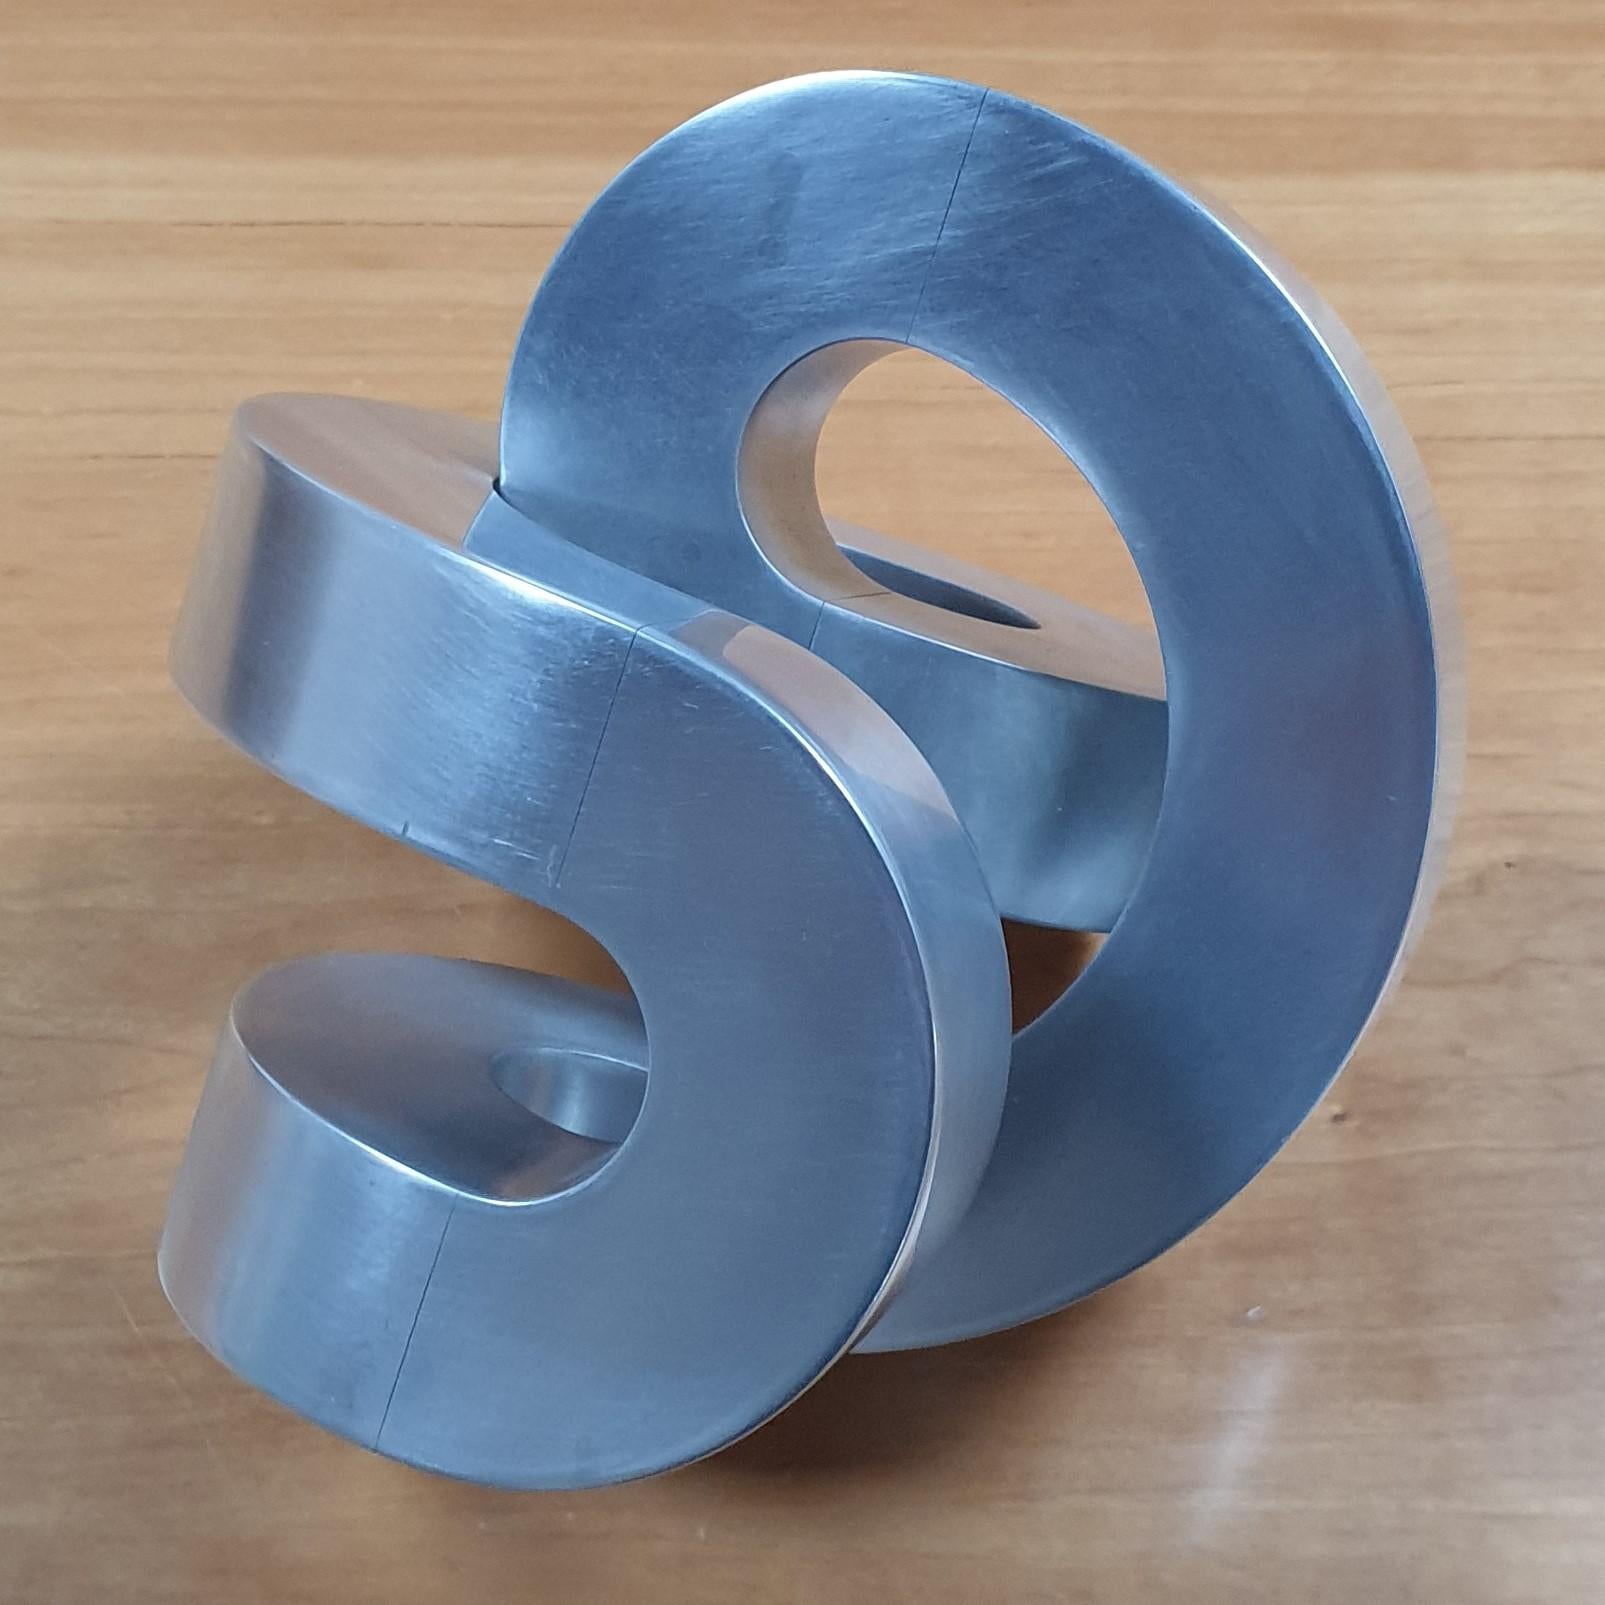 Rondeau (work no. HVP01444) is a small size contemporary modern abstract geometric aluminum sculpture by acclaimed Dutch constructivist Henk van Putten, who was born in The Netherlands but for many years lived and worked in Auroville, India. Upon